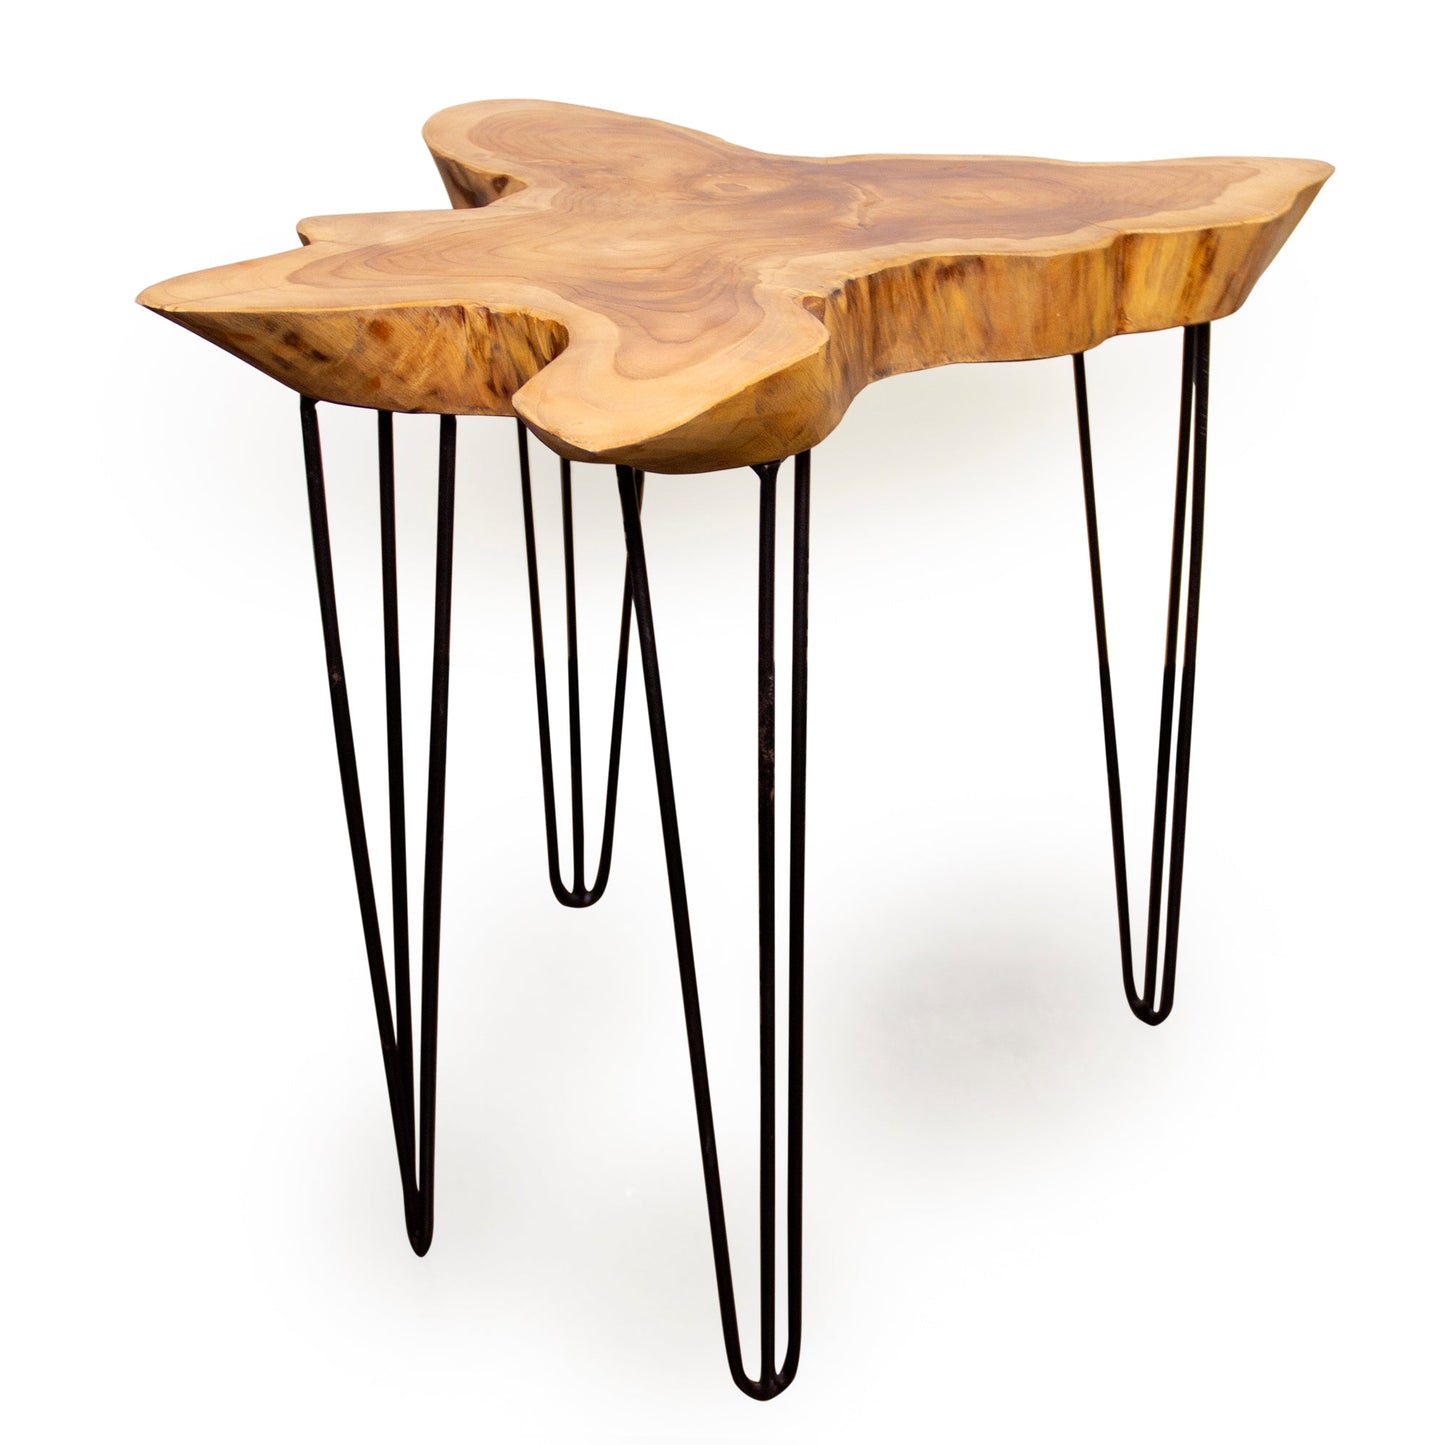 Teak Wood Organic Slab Accent Table by Andaluca Home